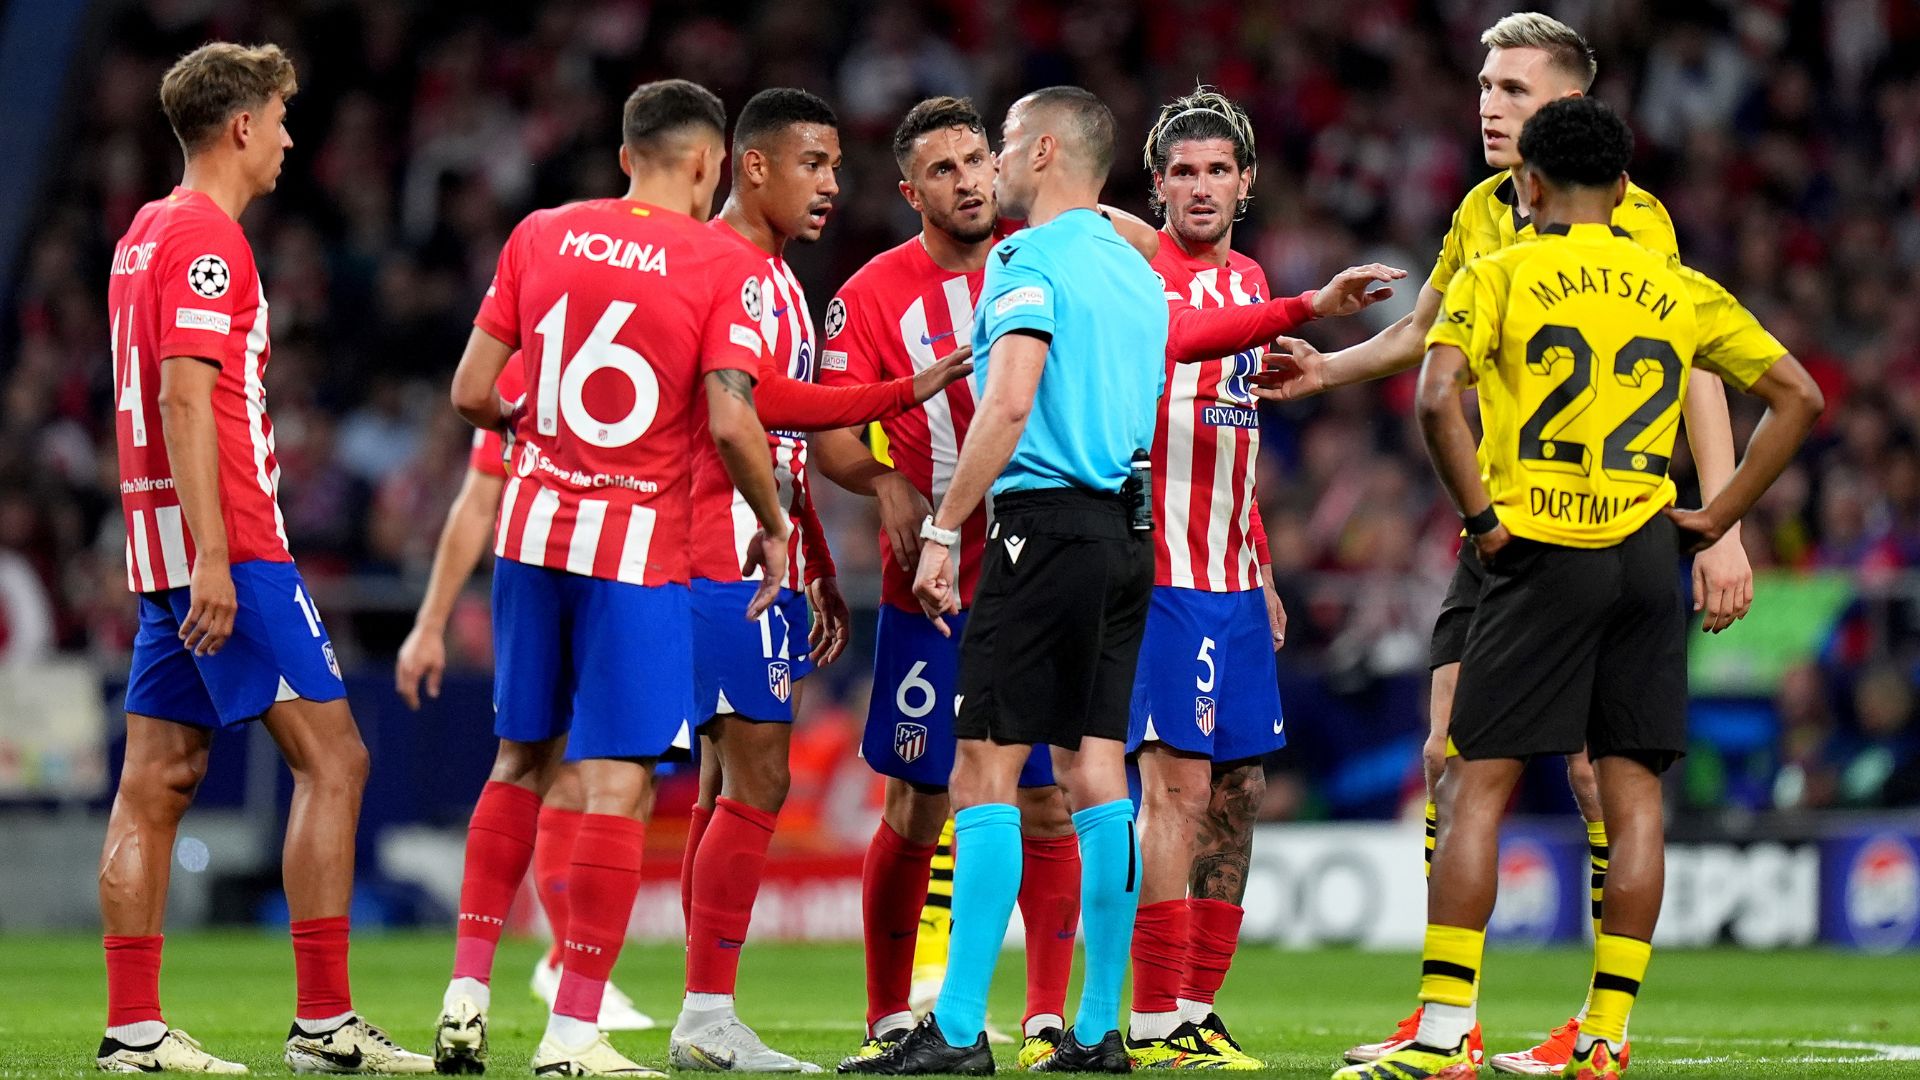 Players' discussion with the match referee (Credit: Getty Images)